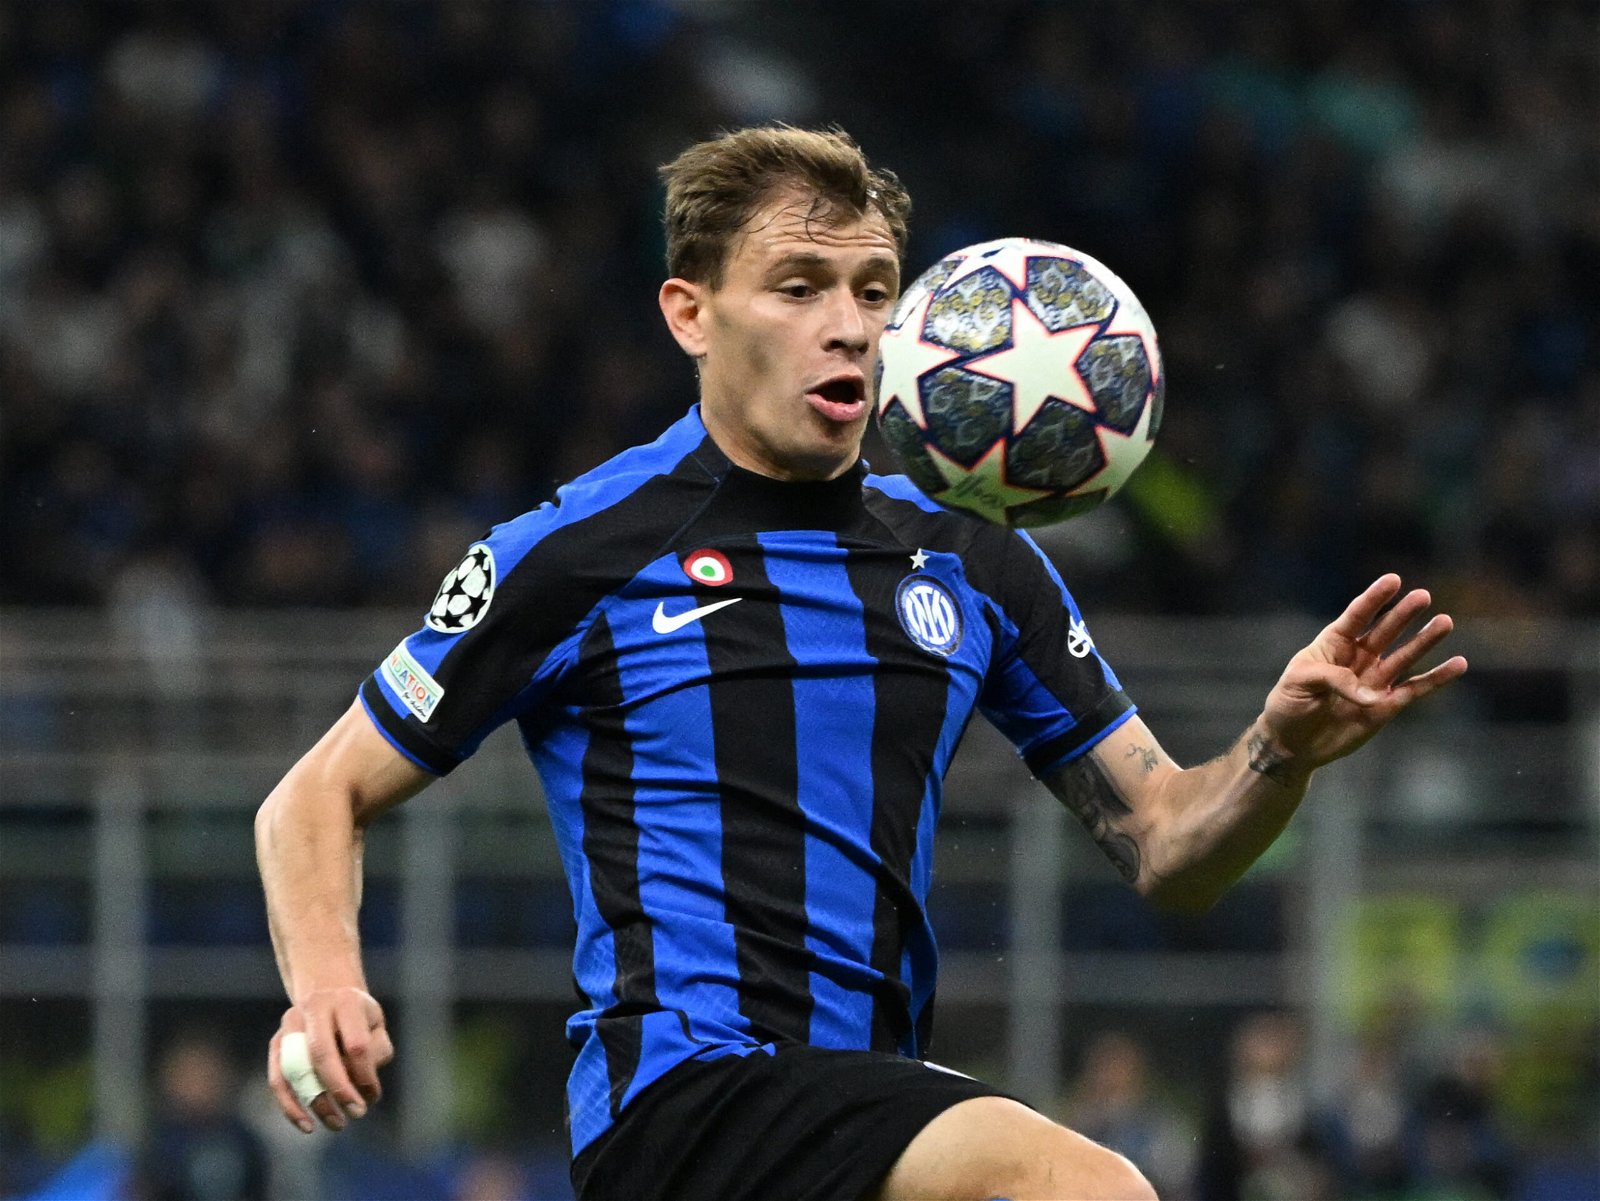 Nico Barella is one of the Manchester United midfield transfer targets